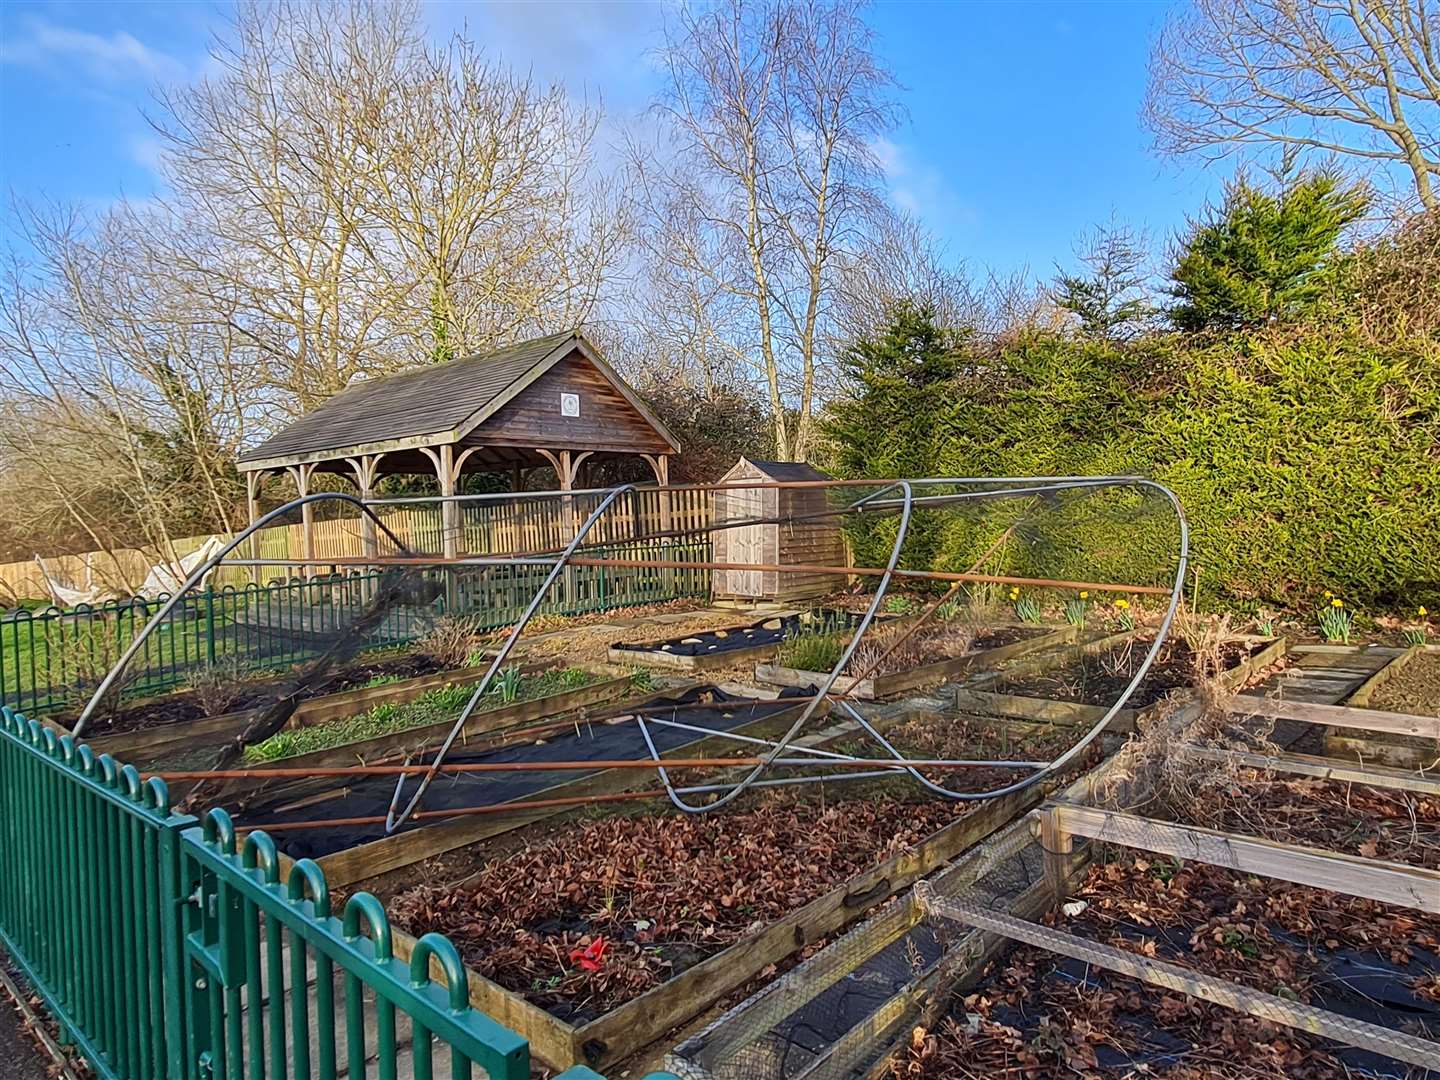 The polytunnel was found ripped and thrown across the allotment